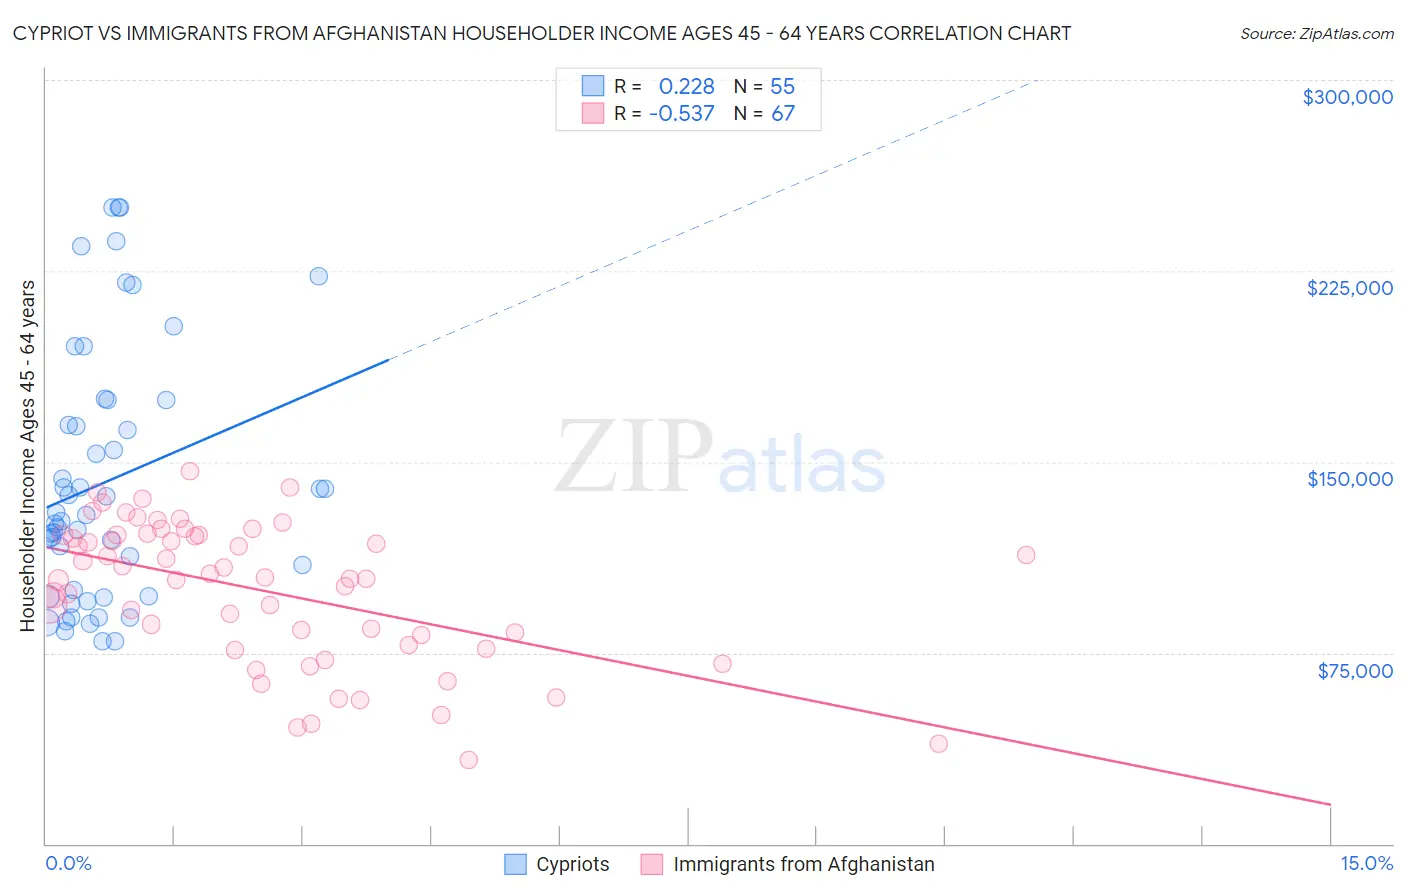 Cypriot vs Immigrants from Afghanistan Householder Income Ages 45 - 64 years